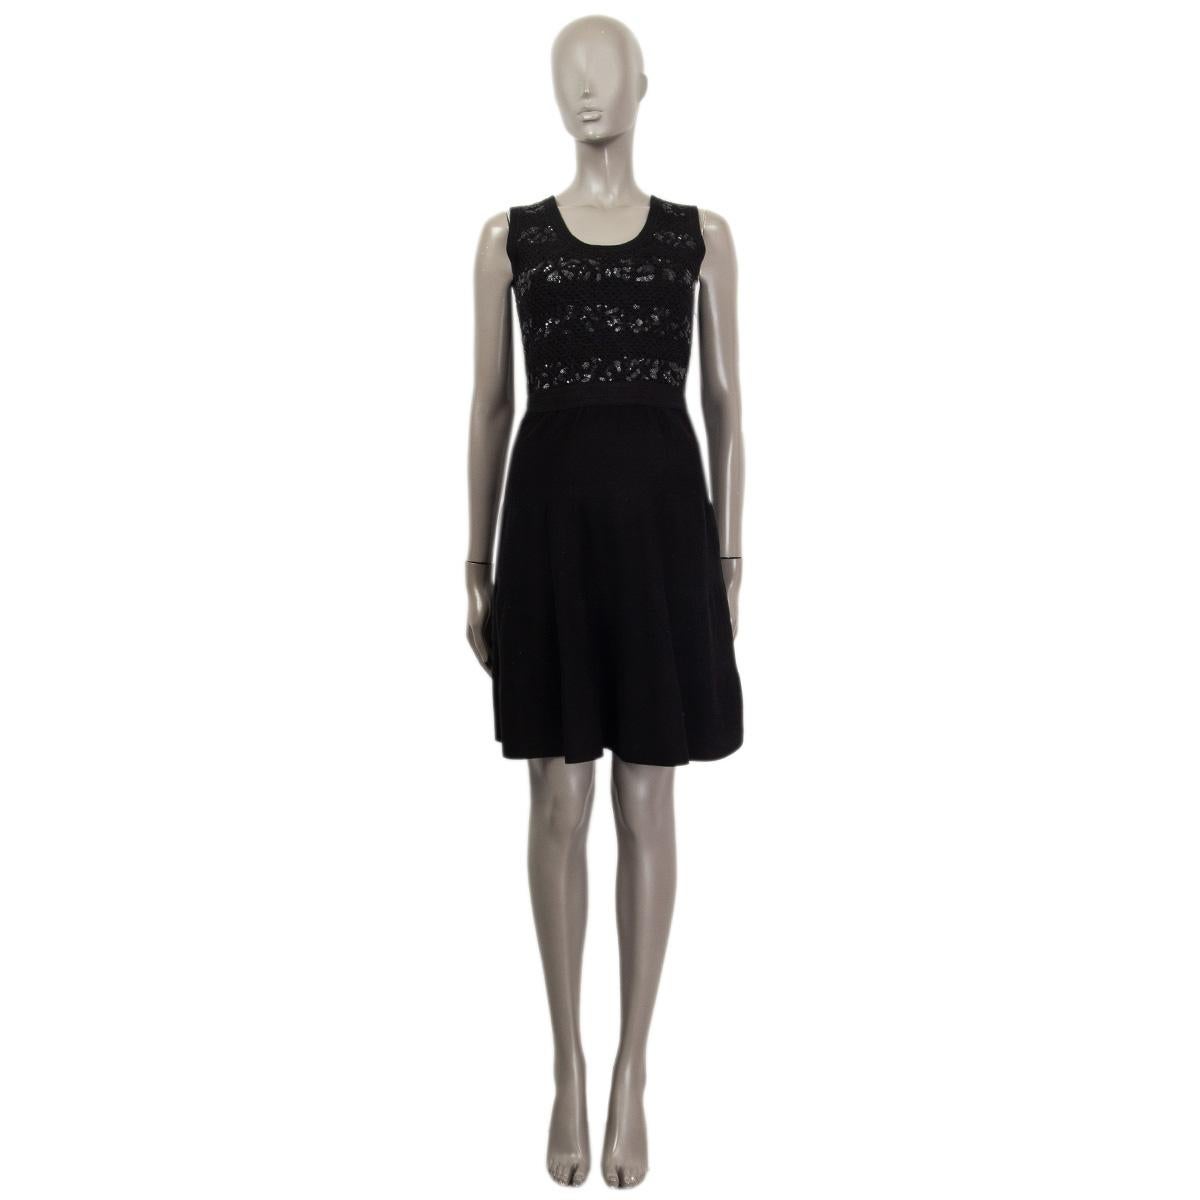 100% authentic Christian Dior sleeveless knee-length knit dress in black cotton (100%). With sequin embellishments at top and a scoop neck. Opens with a concealed zipper on the side. Lined in silk. Has been worn and is in excellent